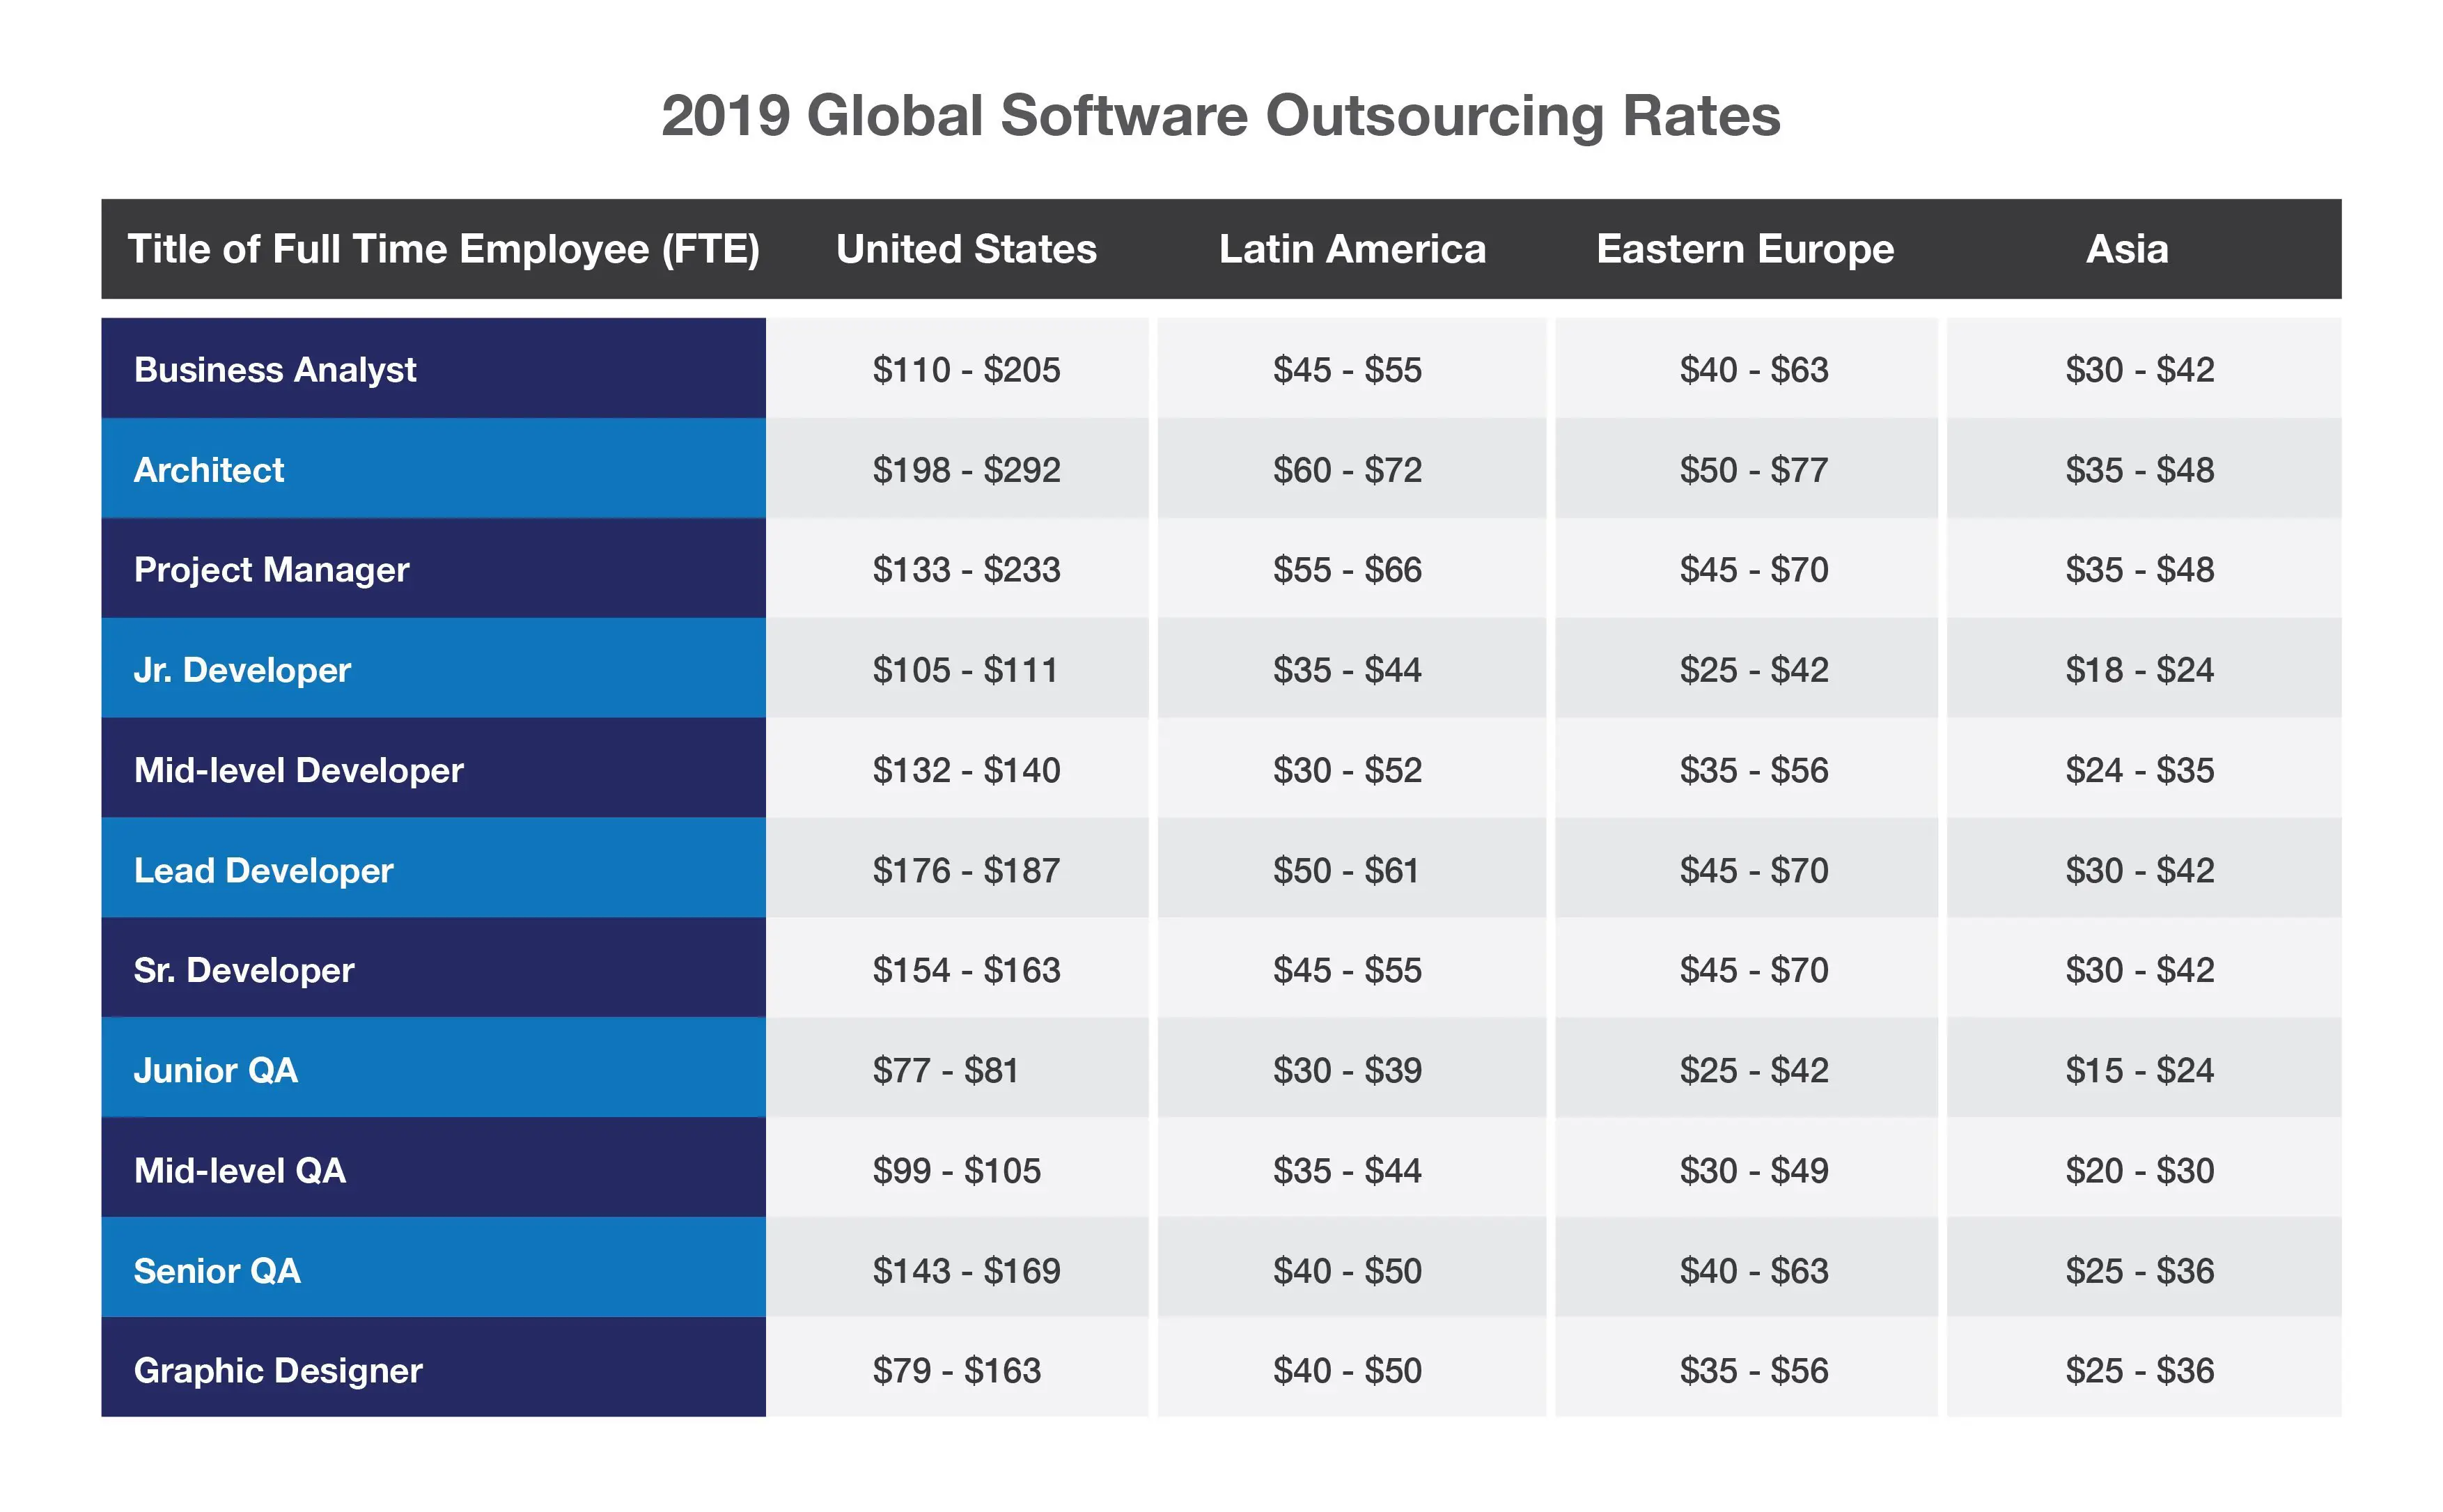 2019 Global Software Outsourcing Rates